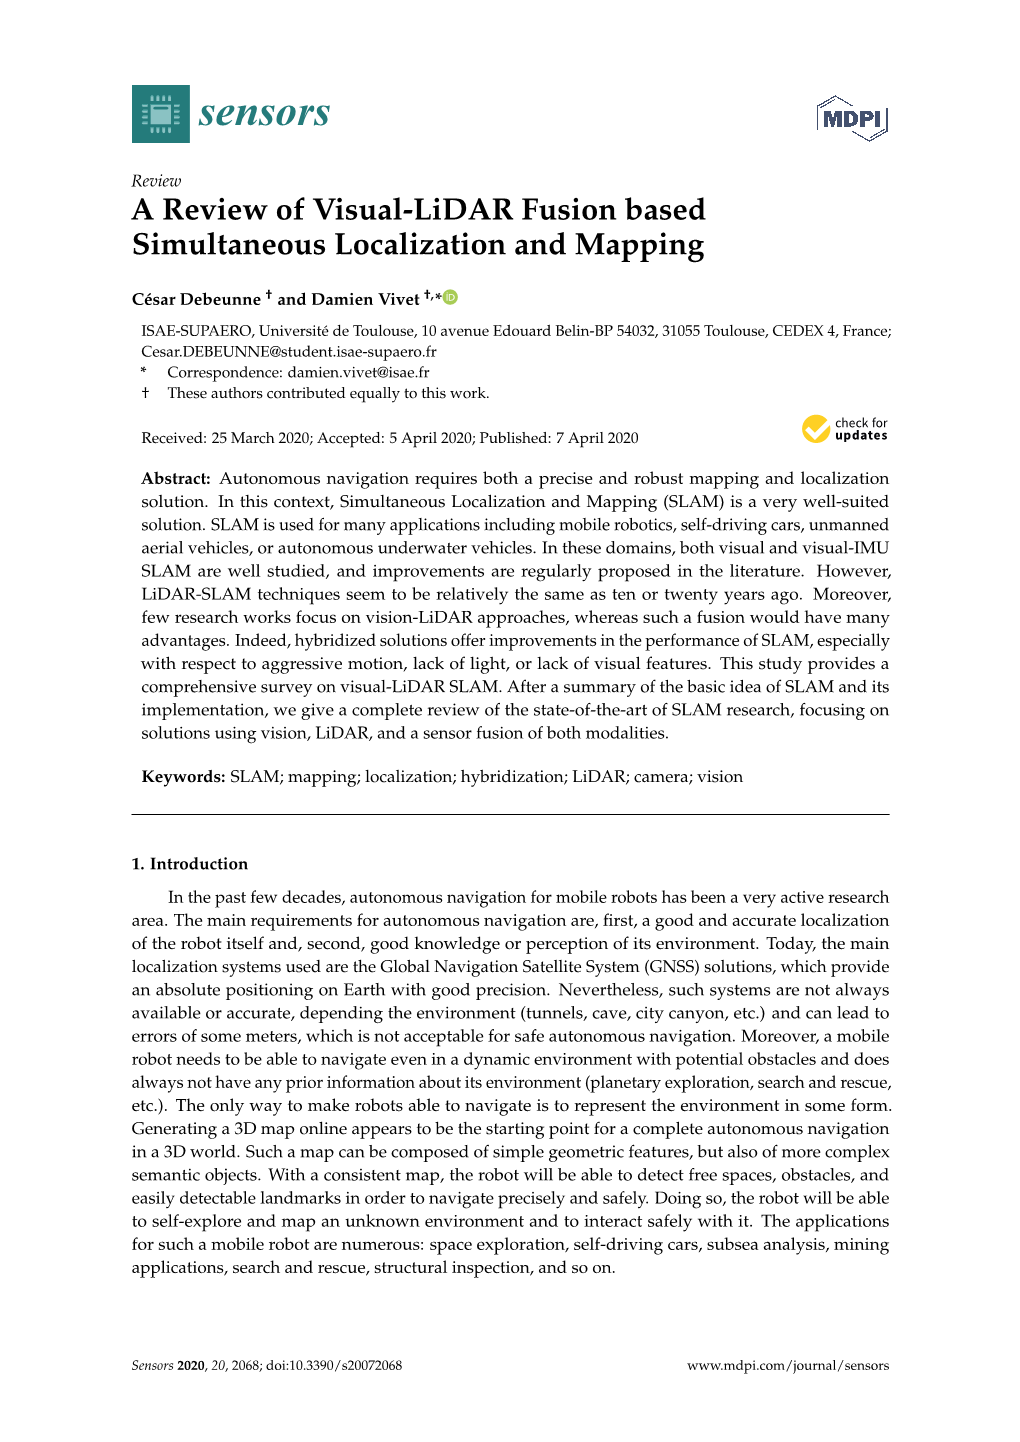 A Review of Visual-Lidar Fusion Based Simultaneous Localization and Mapping